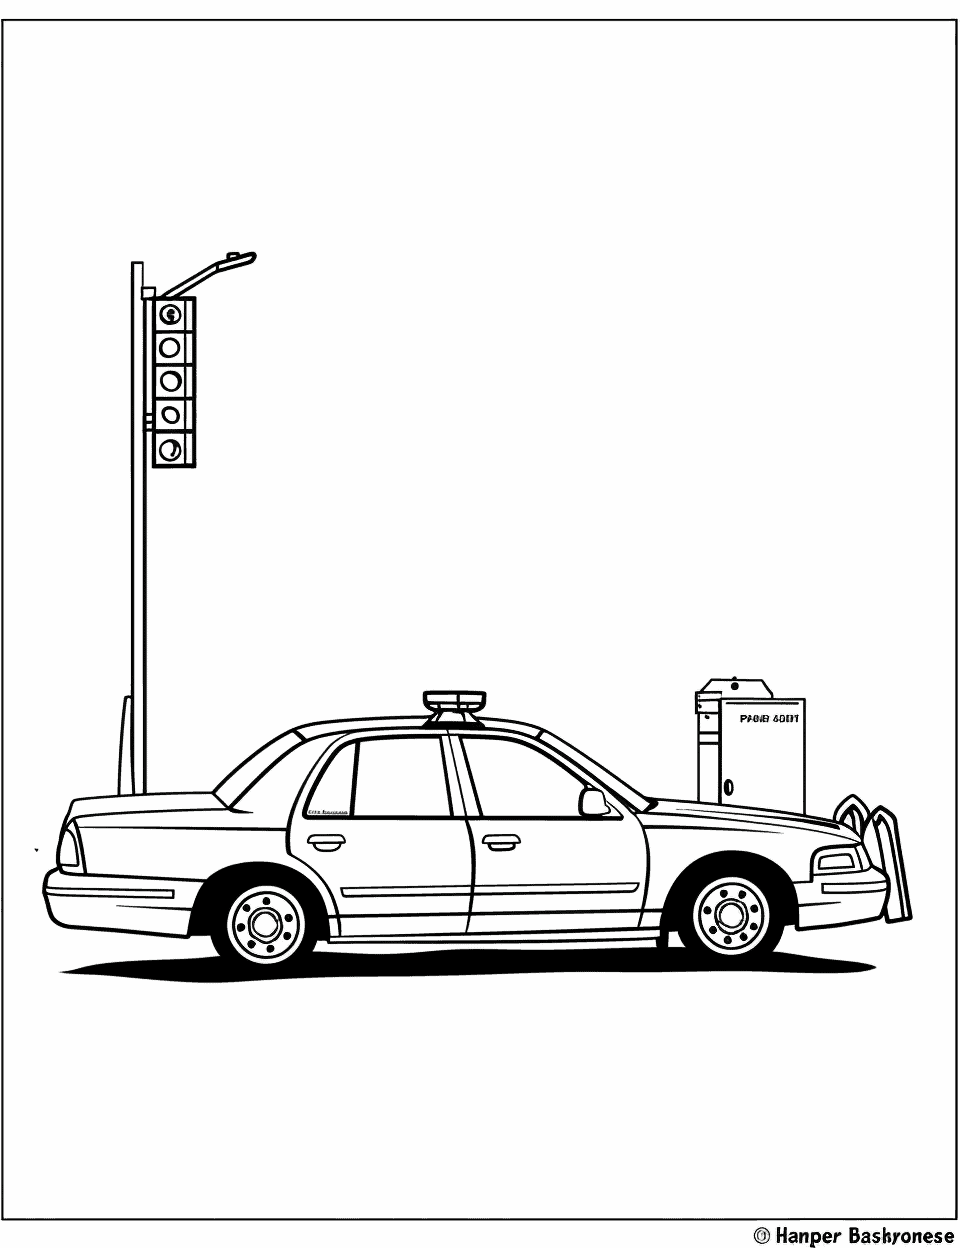 Check Post Operation Police Car Coloring Page - A police car parked at a check post.